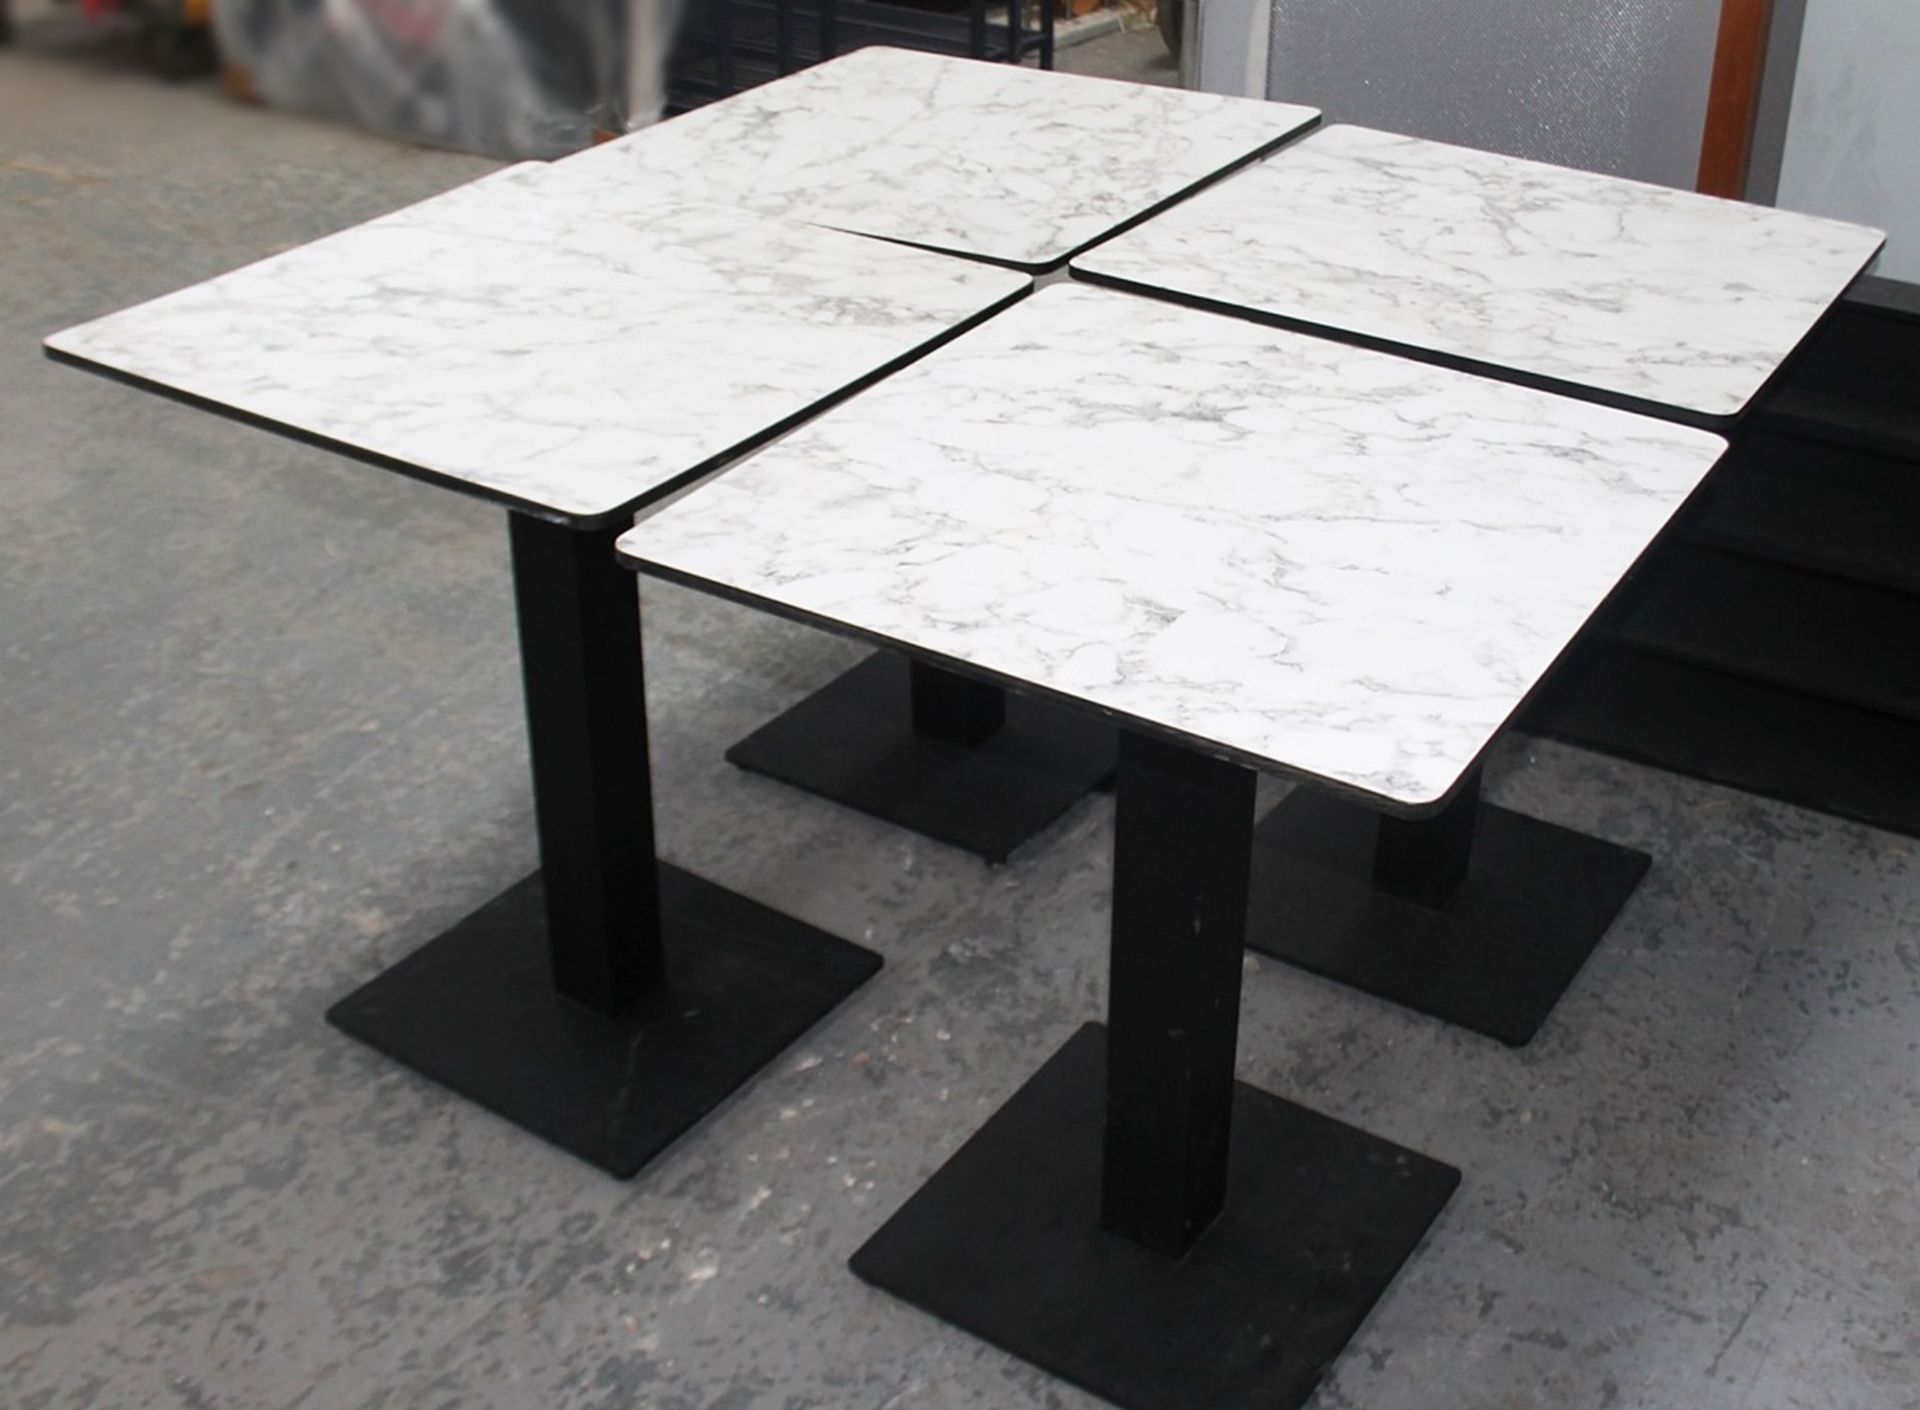 4 x Bistro Tables Featuring 'EXTREMA' Heavy-duty Tops With A White Marble-Style Finish, And Robust - Image 2 of 4